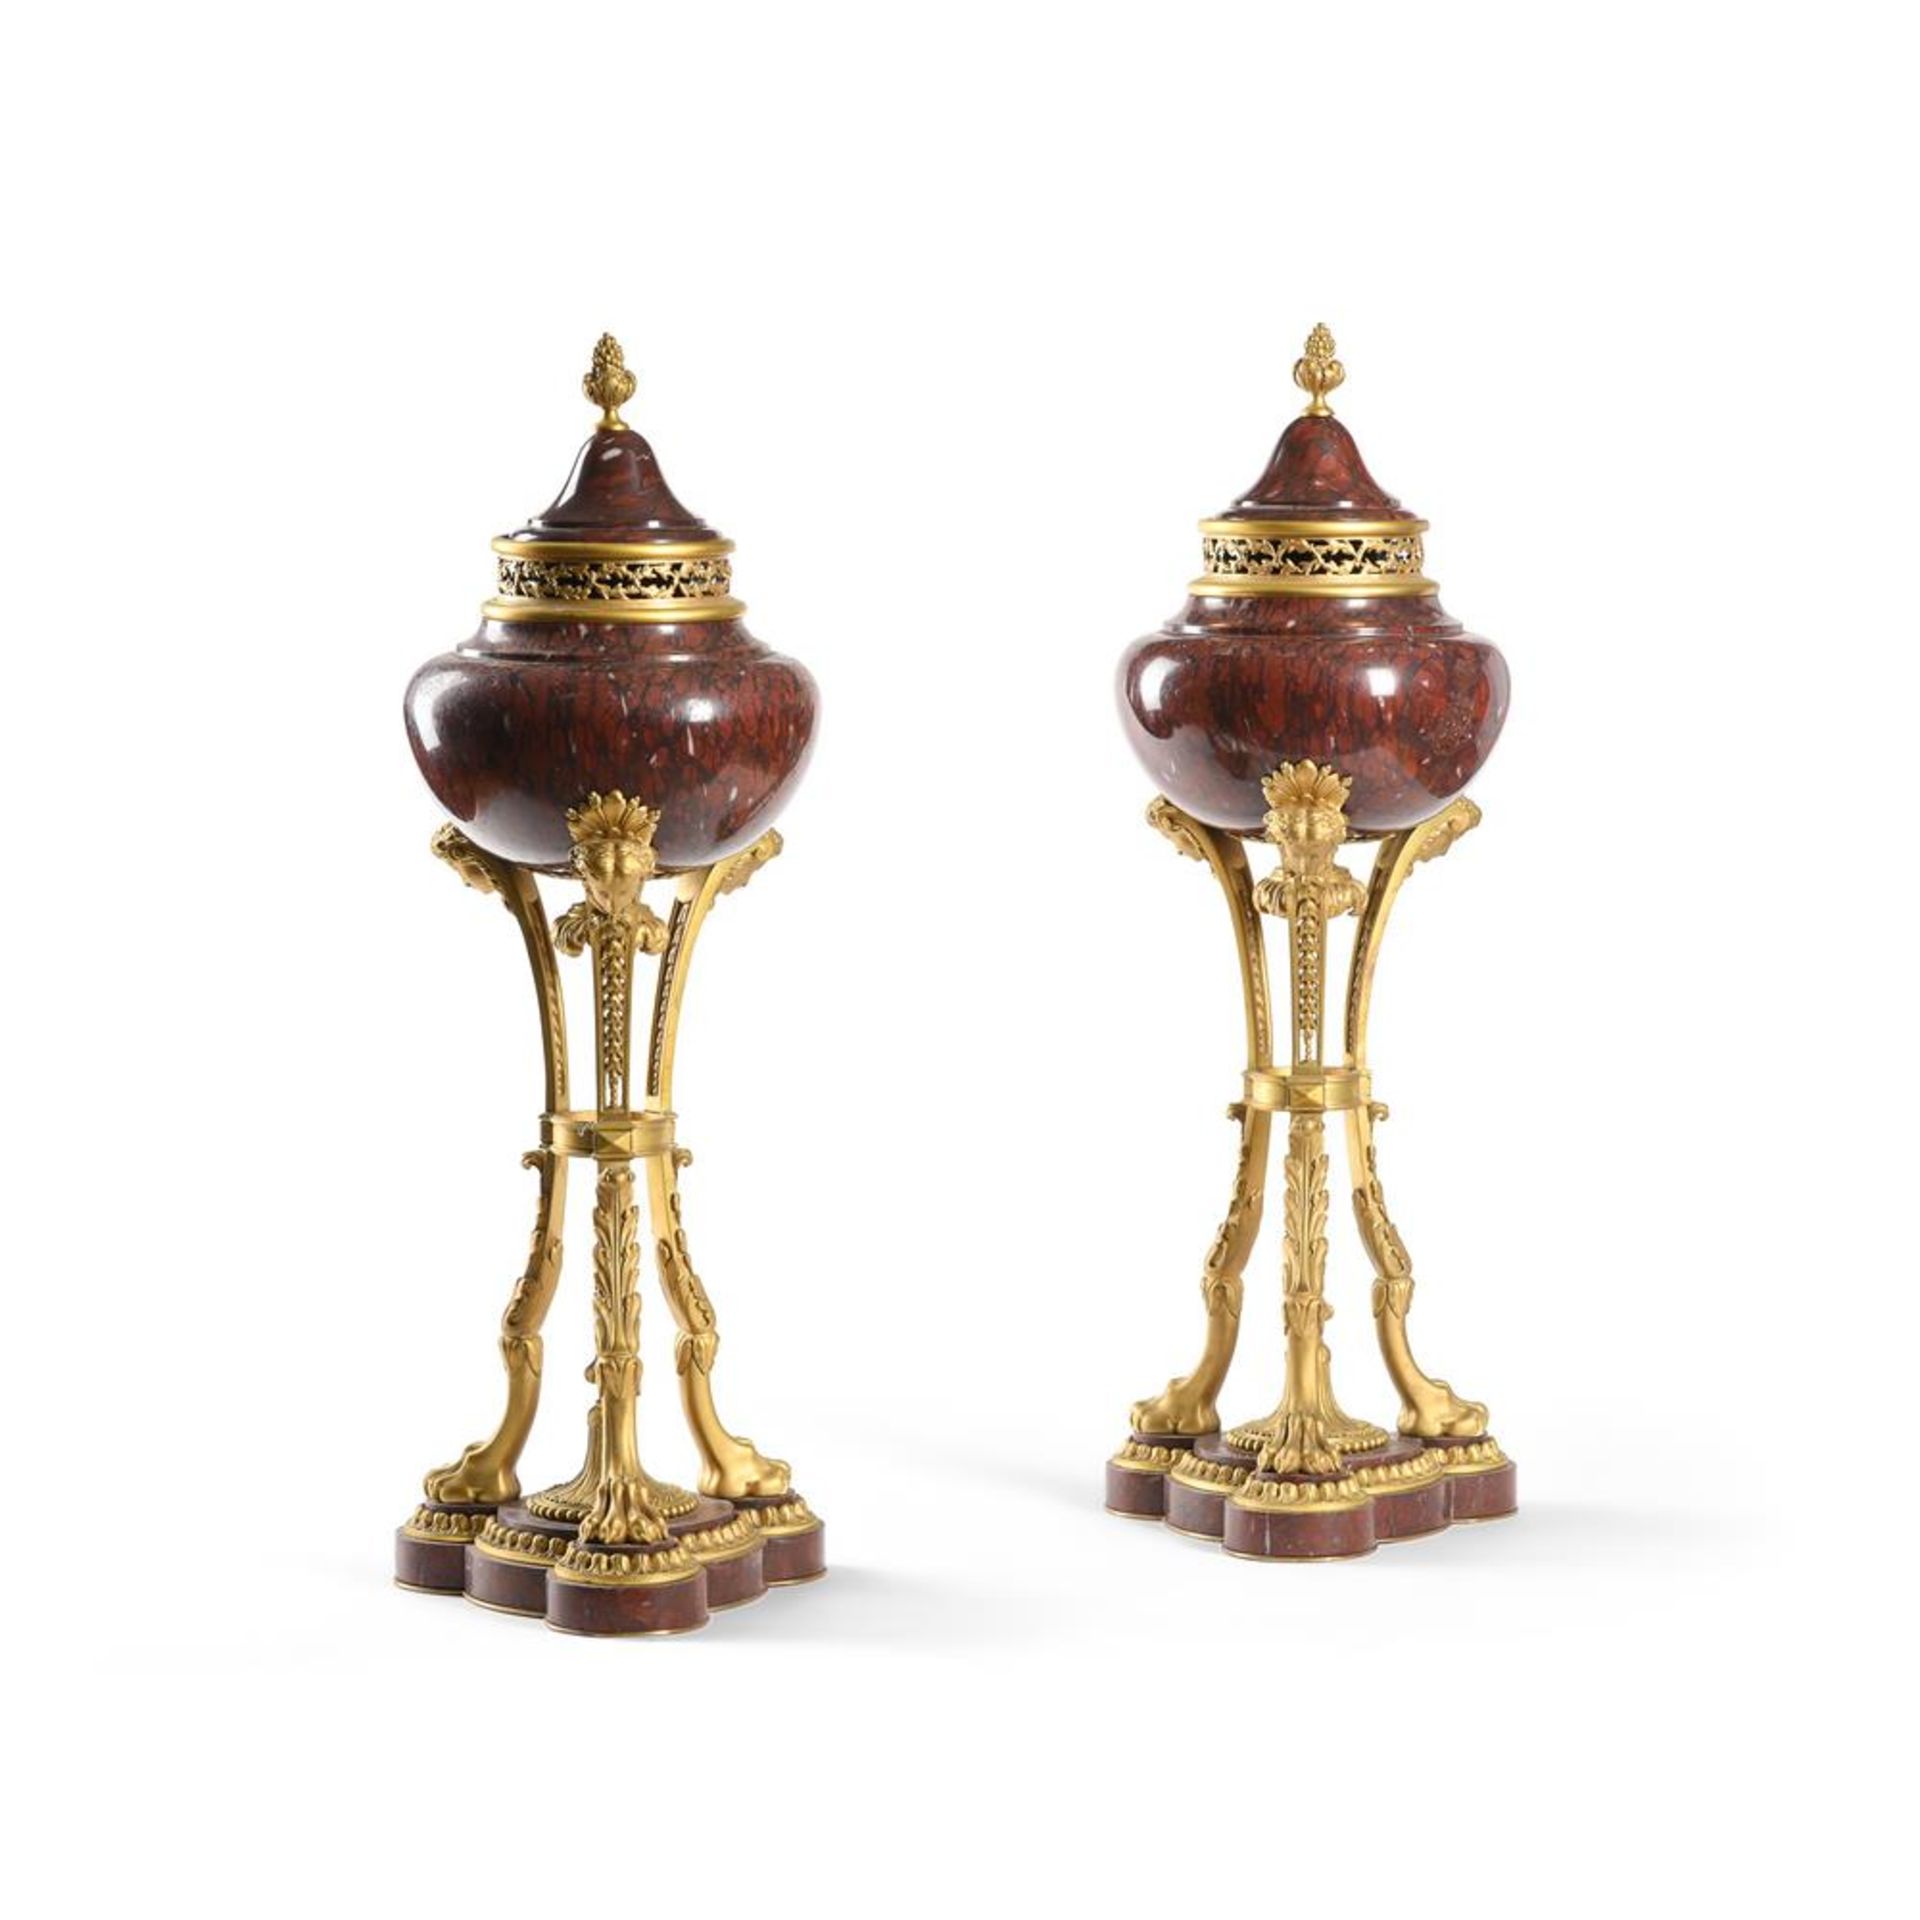 A LARGE PAIR OF FRENCH ORMOLU MOUNTED ROUGE GRIOTTE MARBLE BRULE PARFUMS, 19TH OR 20TH CENTURY